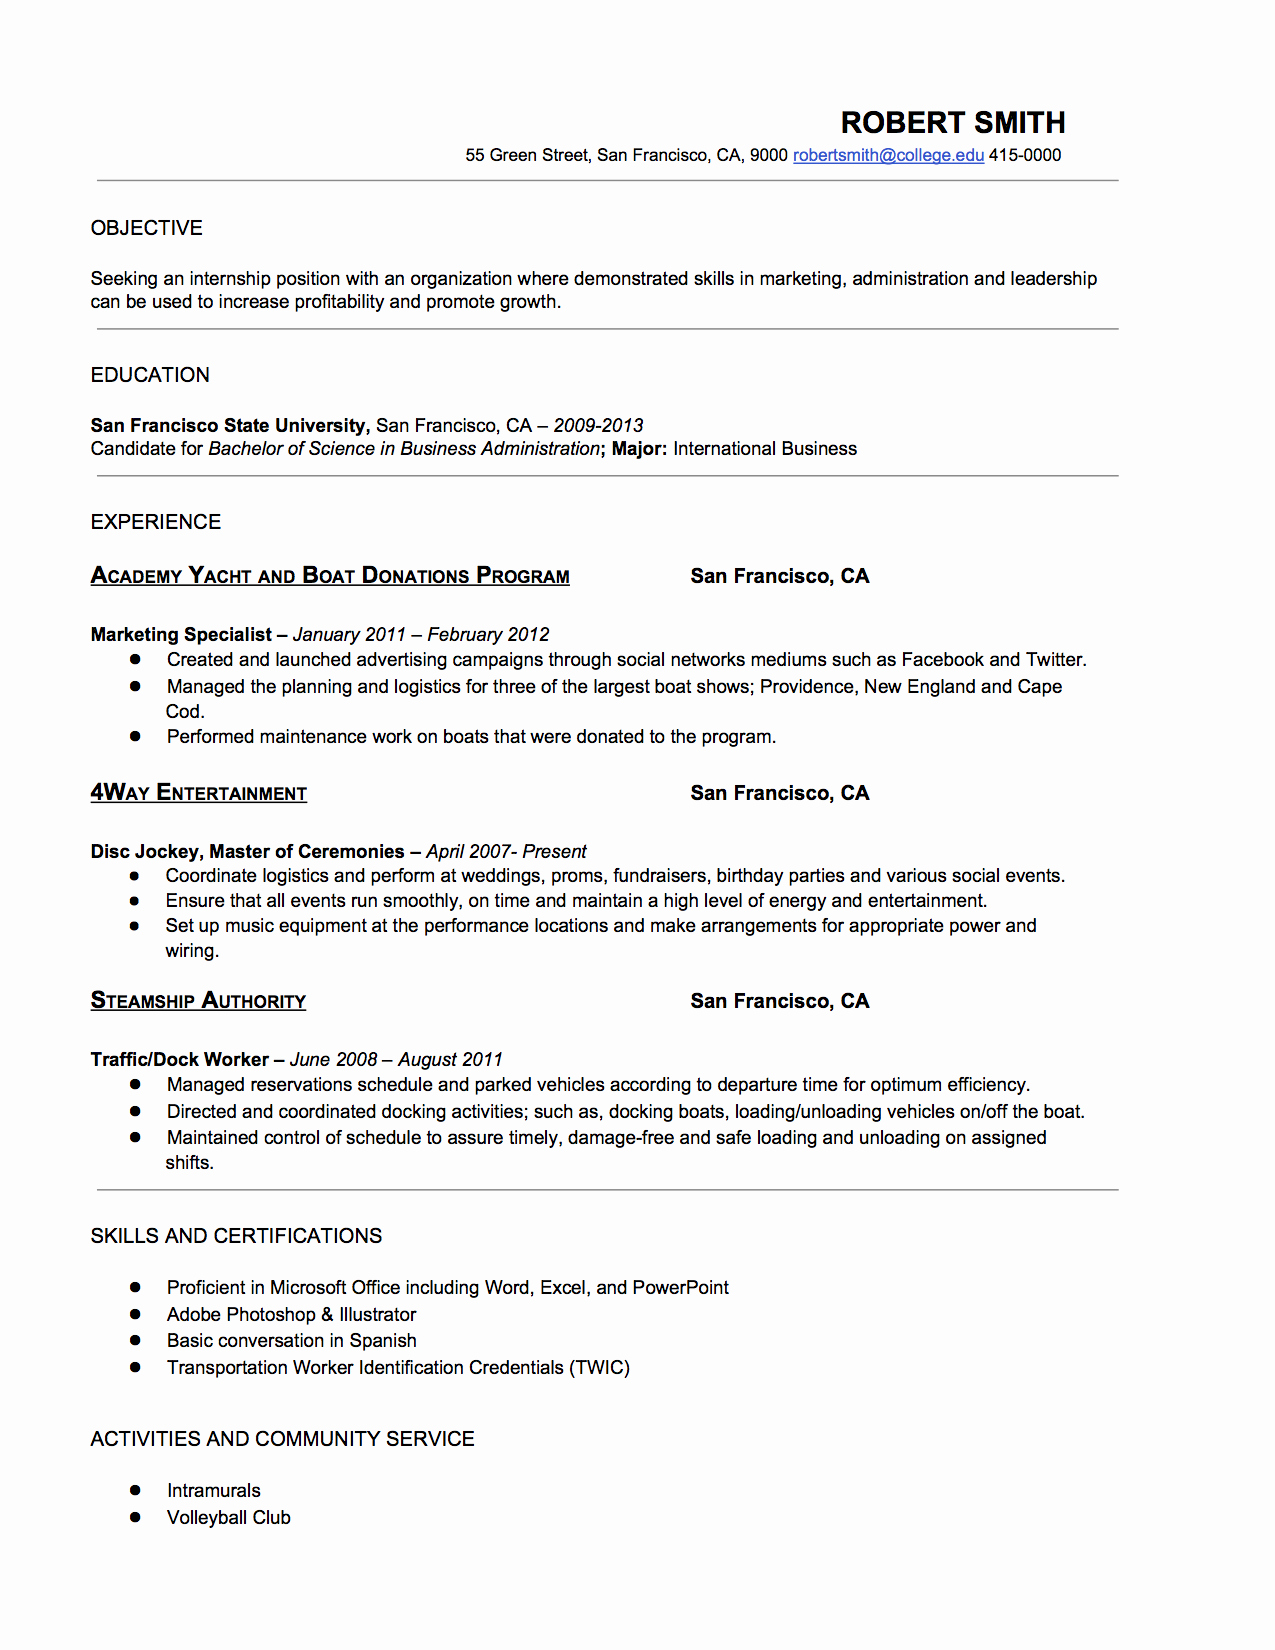 Resume for Entry Level Position Beautiful Entry Level Desktop Support Resume Resume Ideas